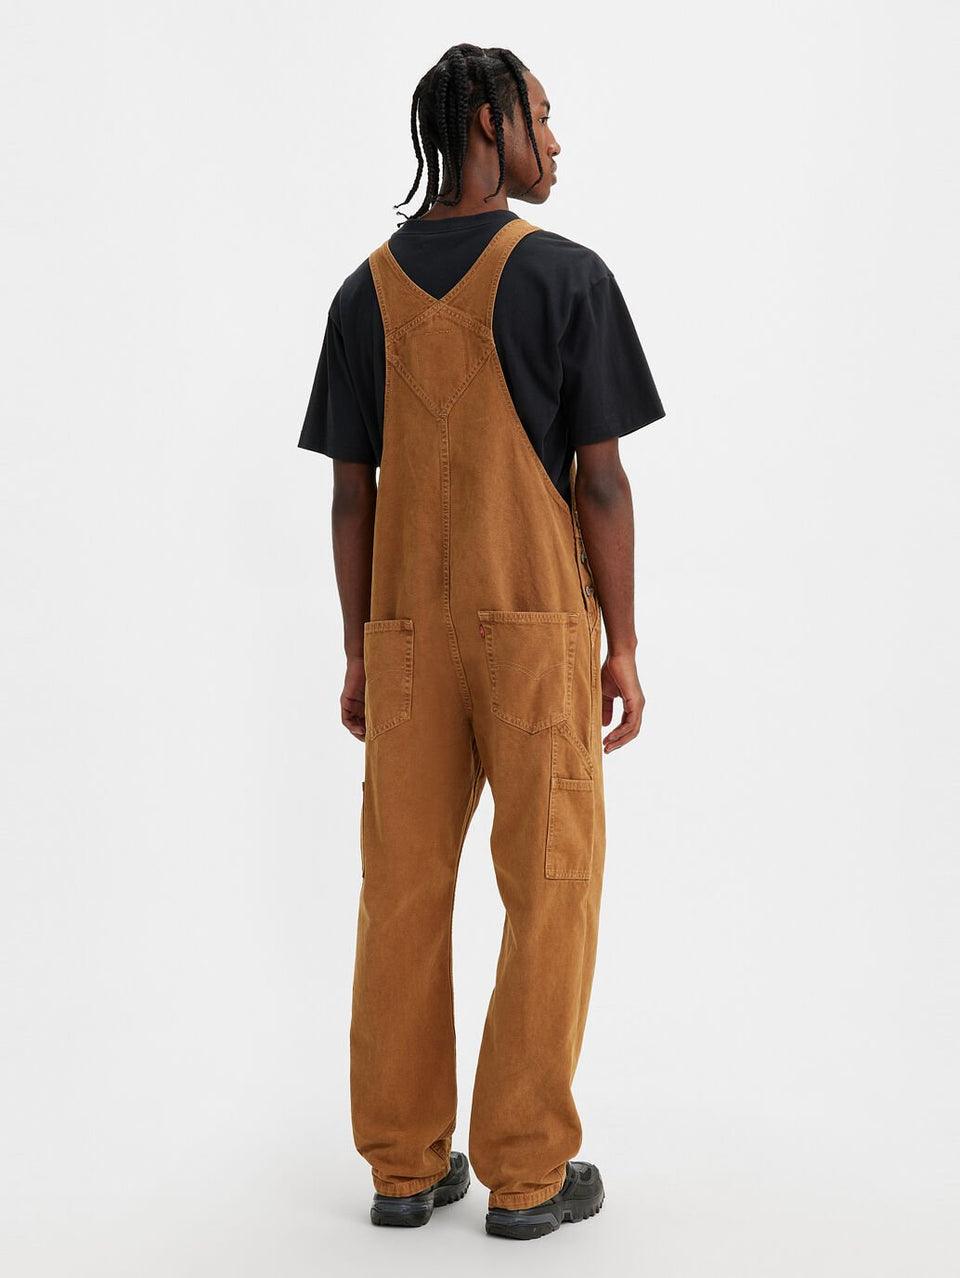 NWT-Levis Workwear Capsule Ginger Tan Overalls -Size XL - Jean Pool